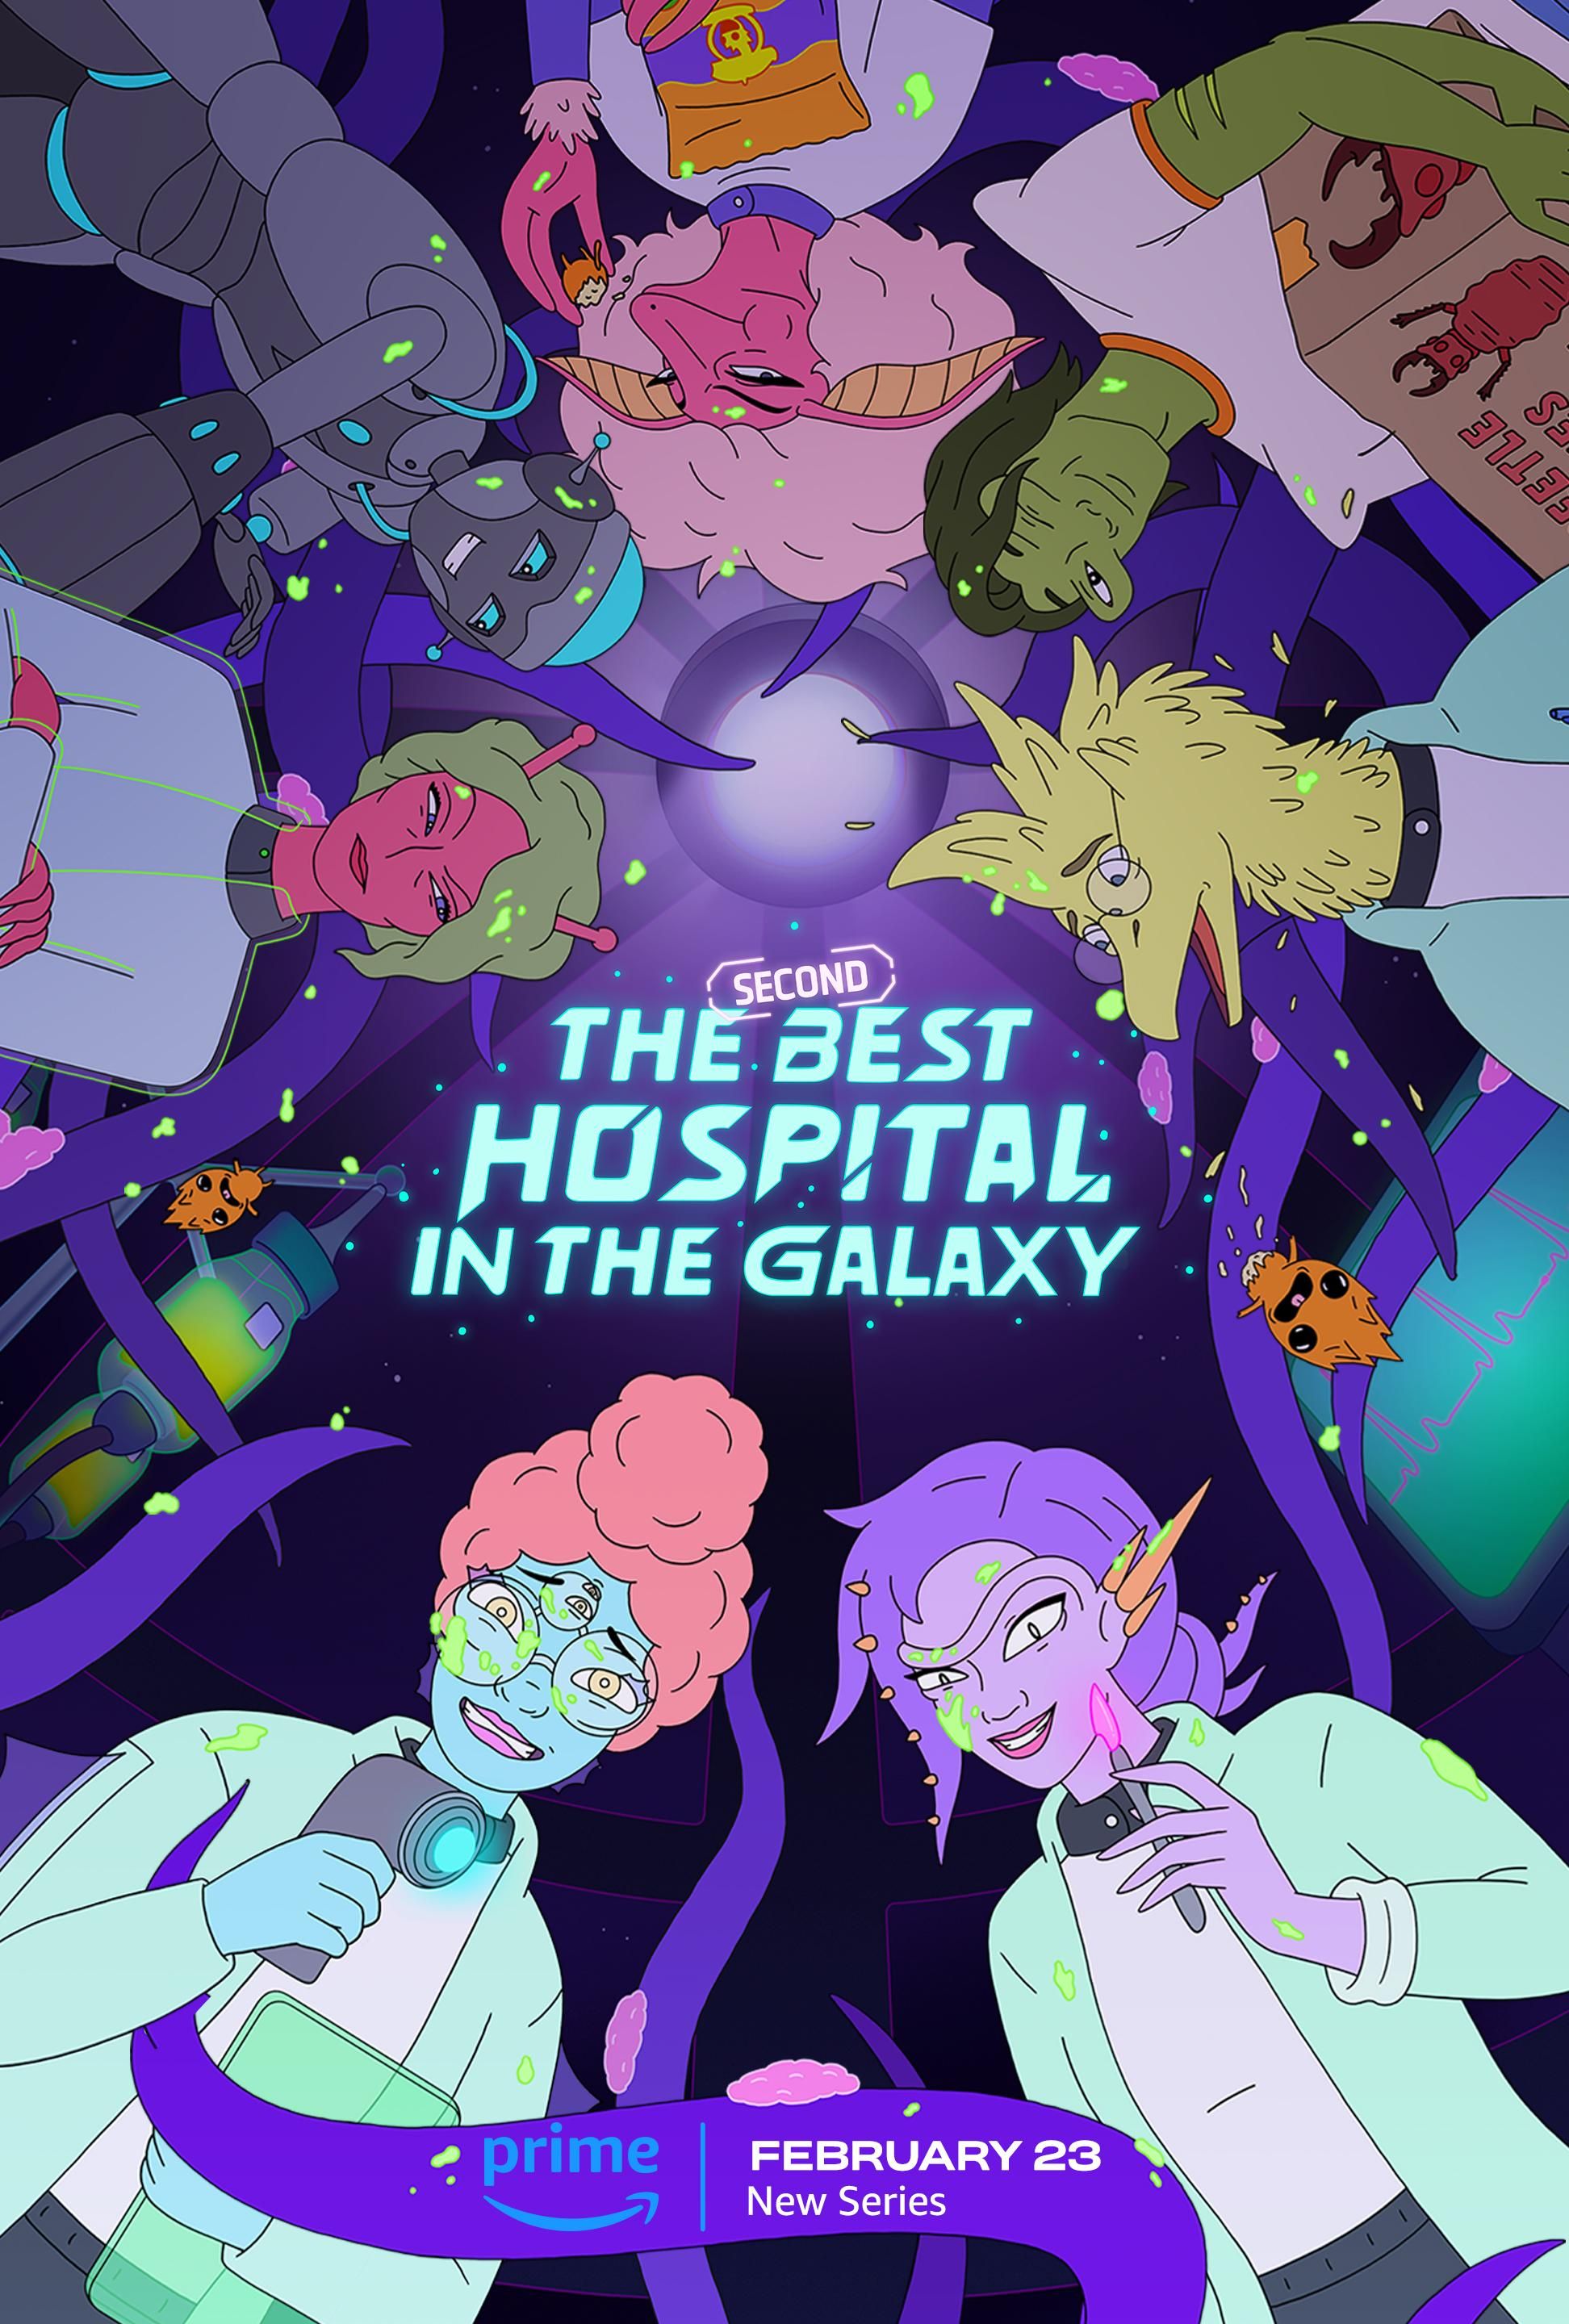 The Second Best Hospital in the Galaxy TV Show Poster Featuring Alien Creatures